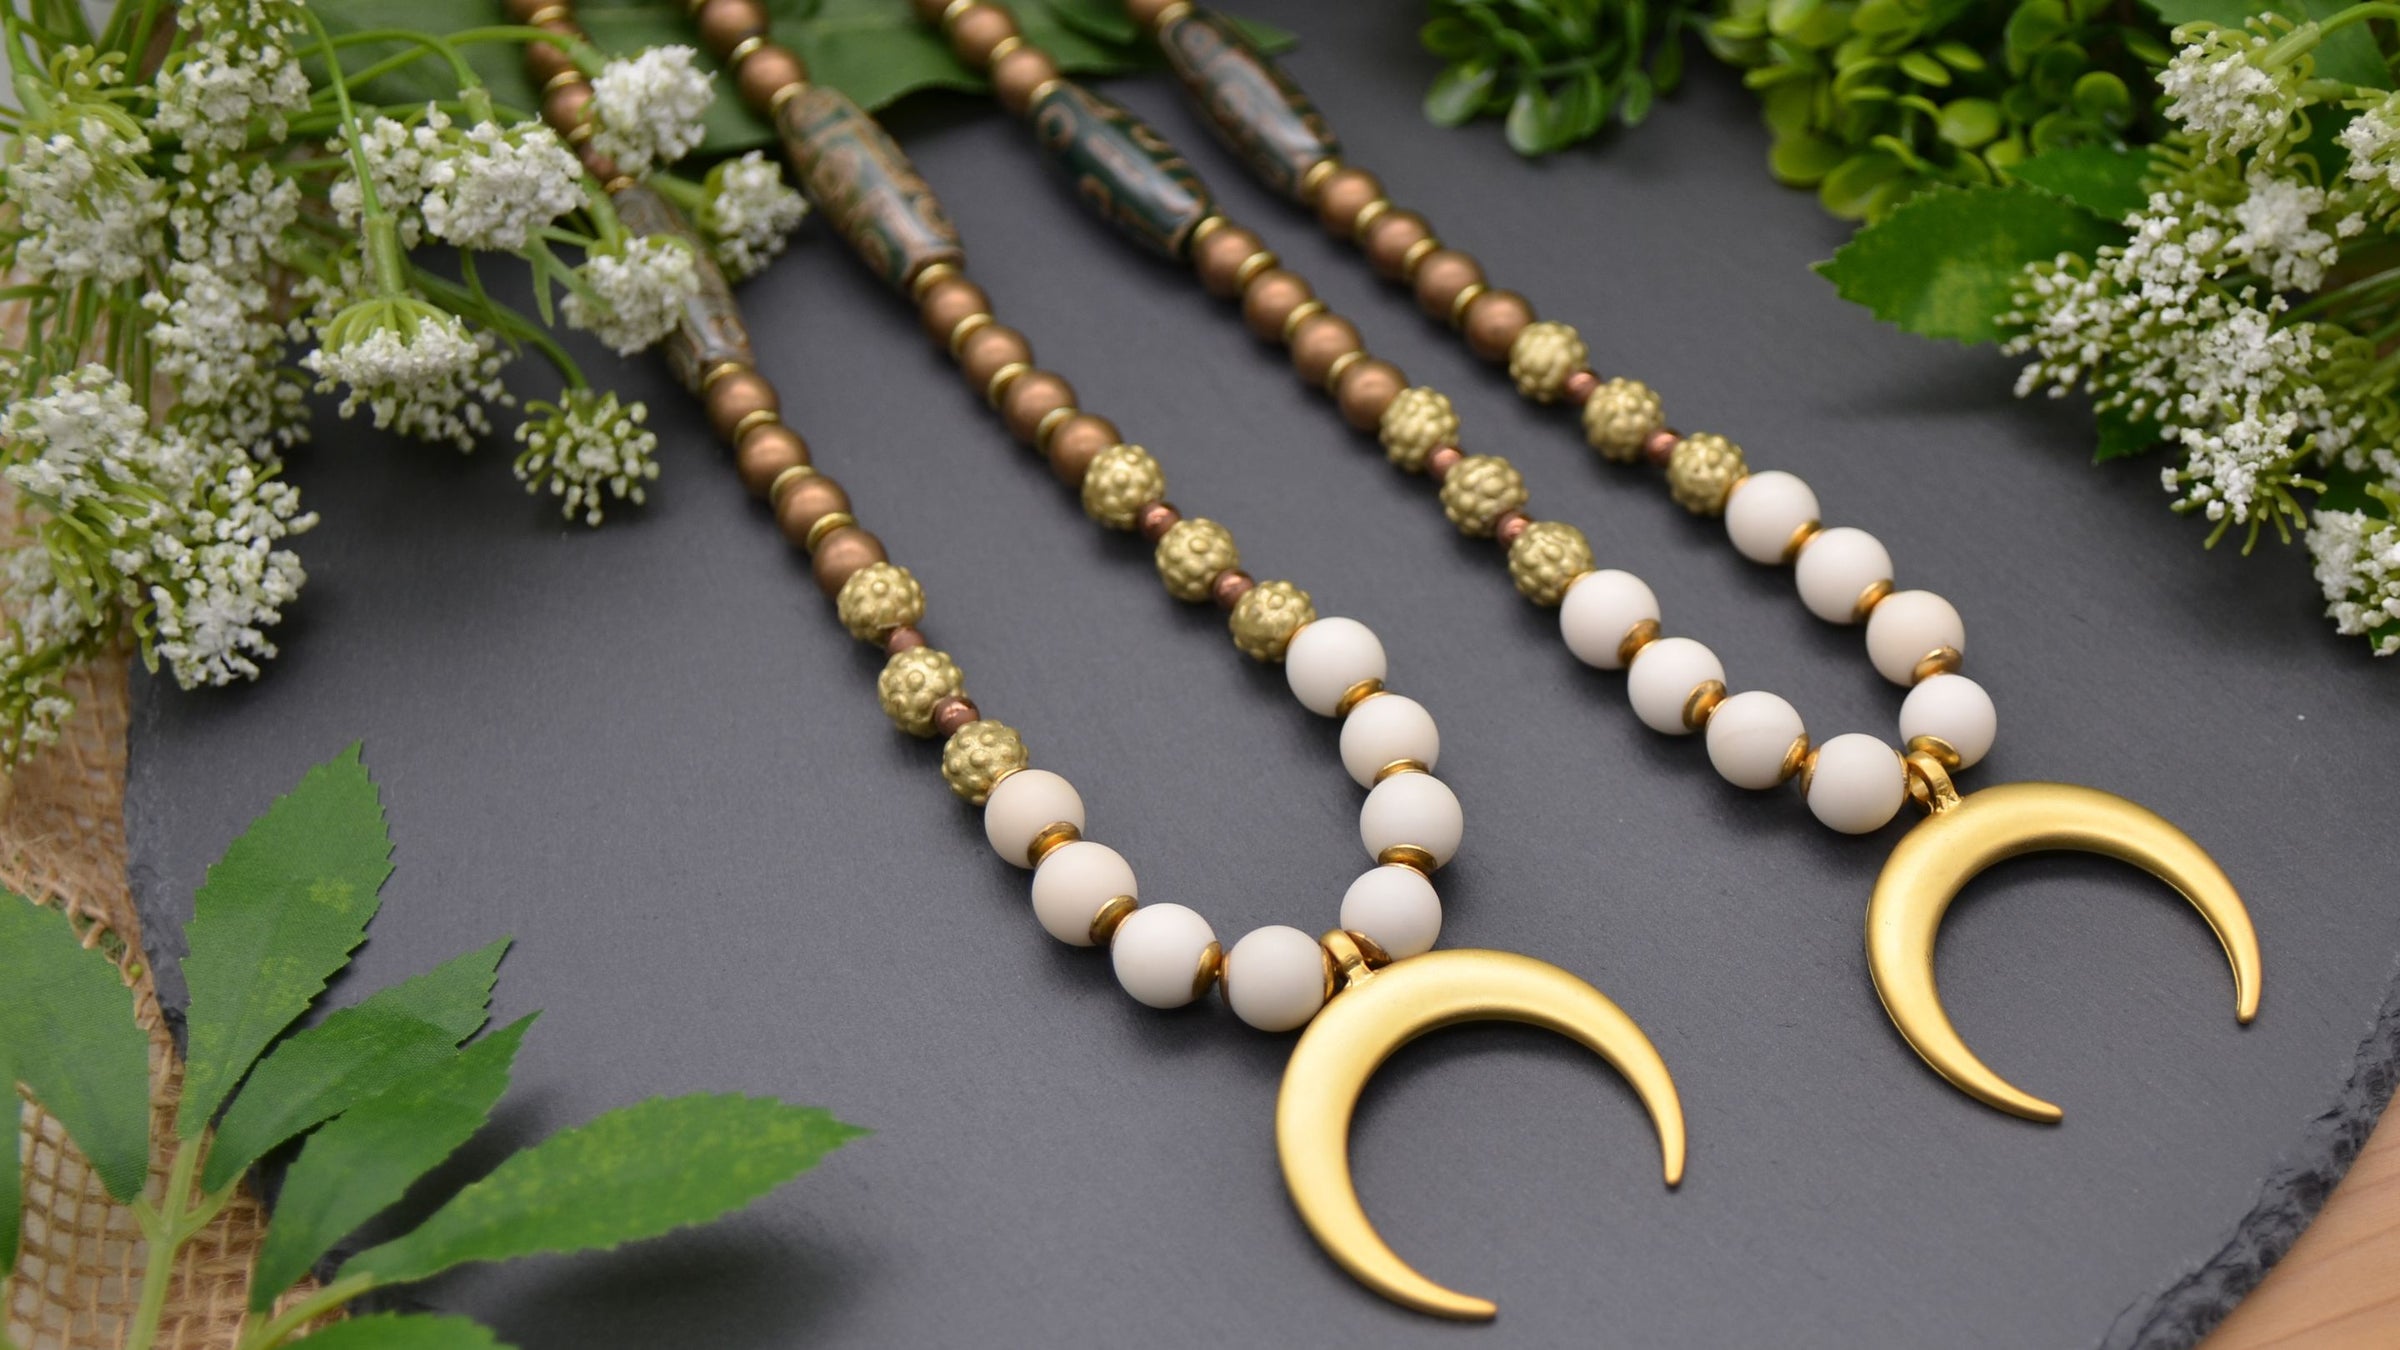 Mother’s Day Gift Ideas - Gemstone jewelry necklace with jade, agate, and hematite with crescent moon pendant | Emerald Sun Creations